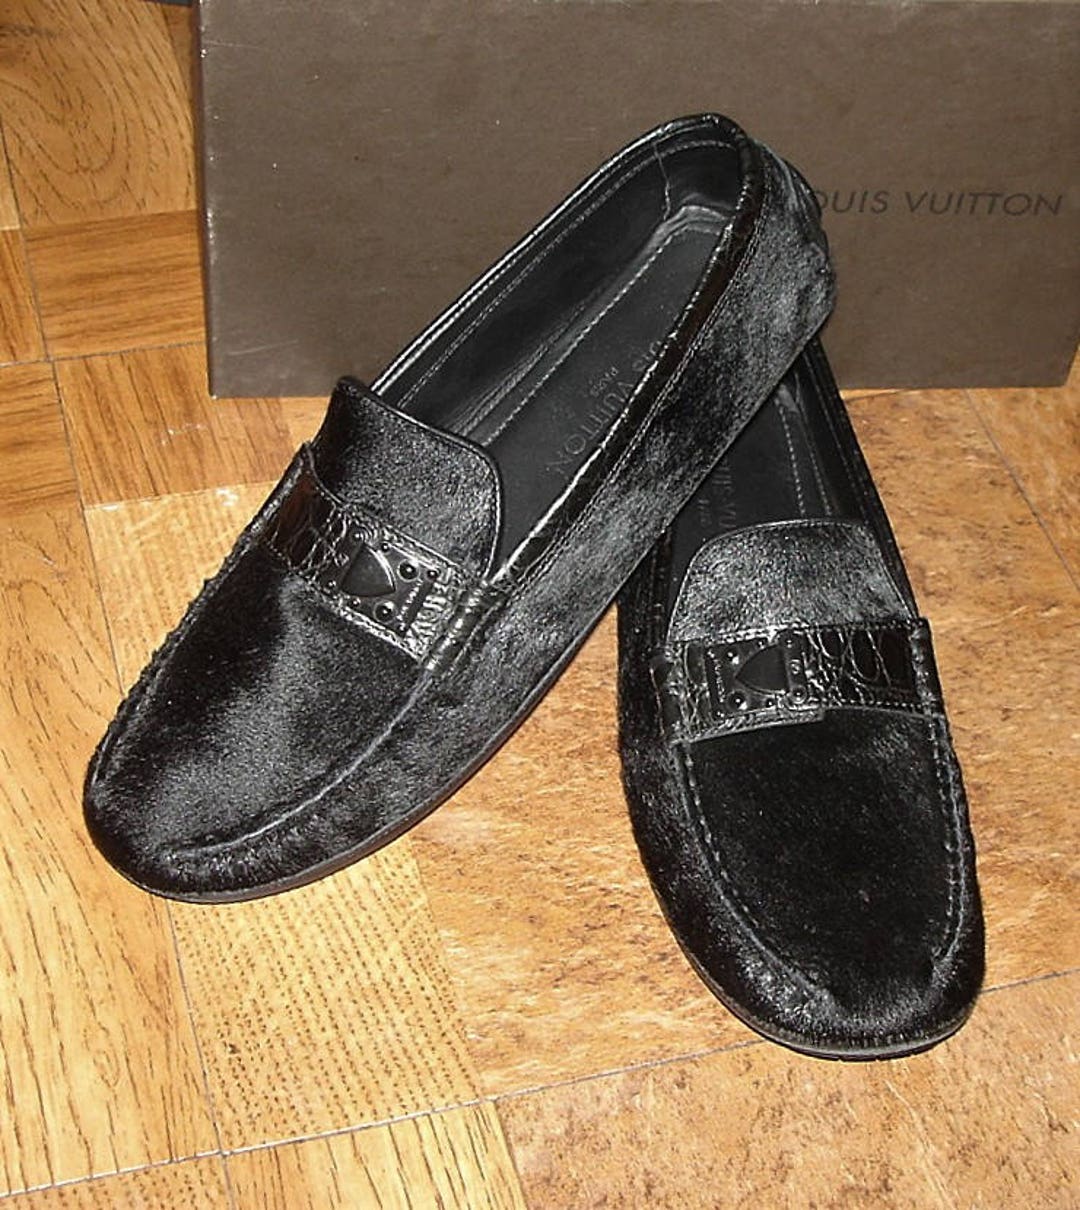 LOUIS VUITTON SUEDE LOAFER DRIVING MOCCASINS LV SHOES SIZE 39.5 US 6.5  AUTHENTIC